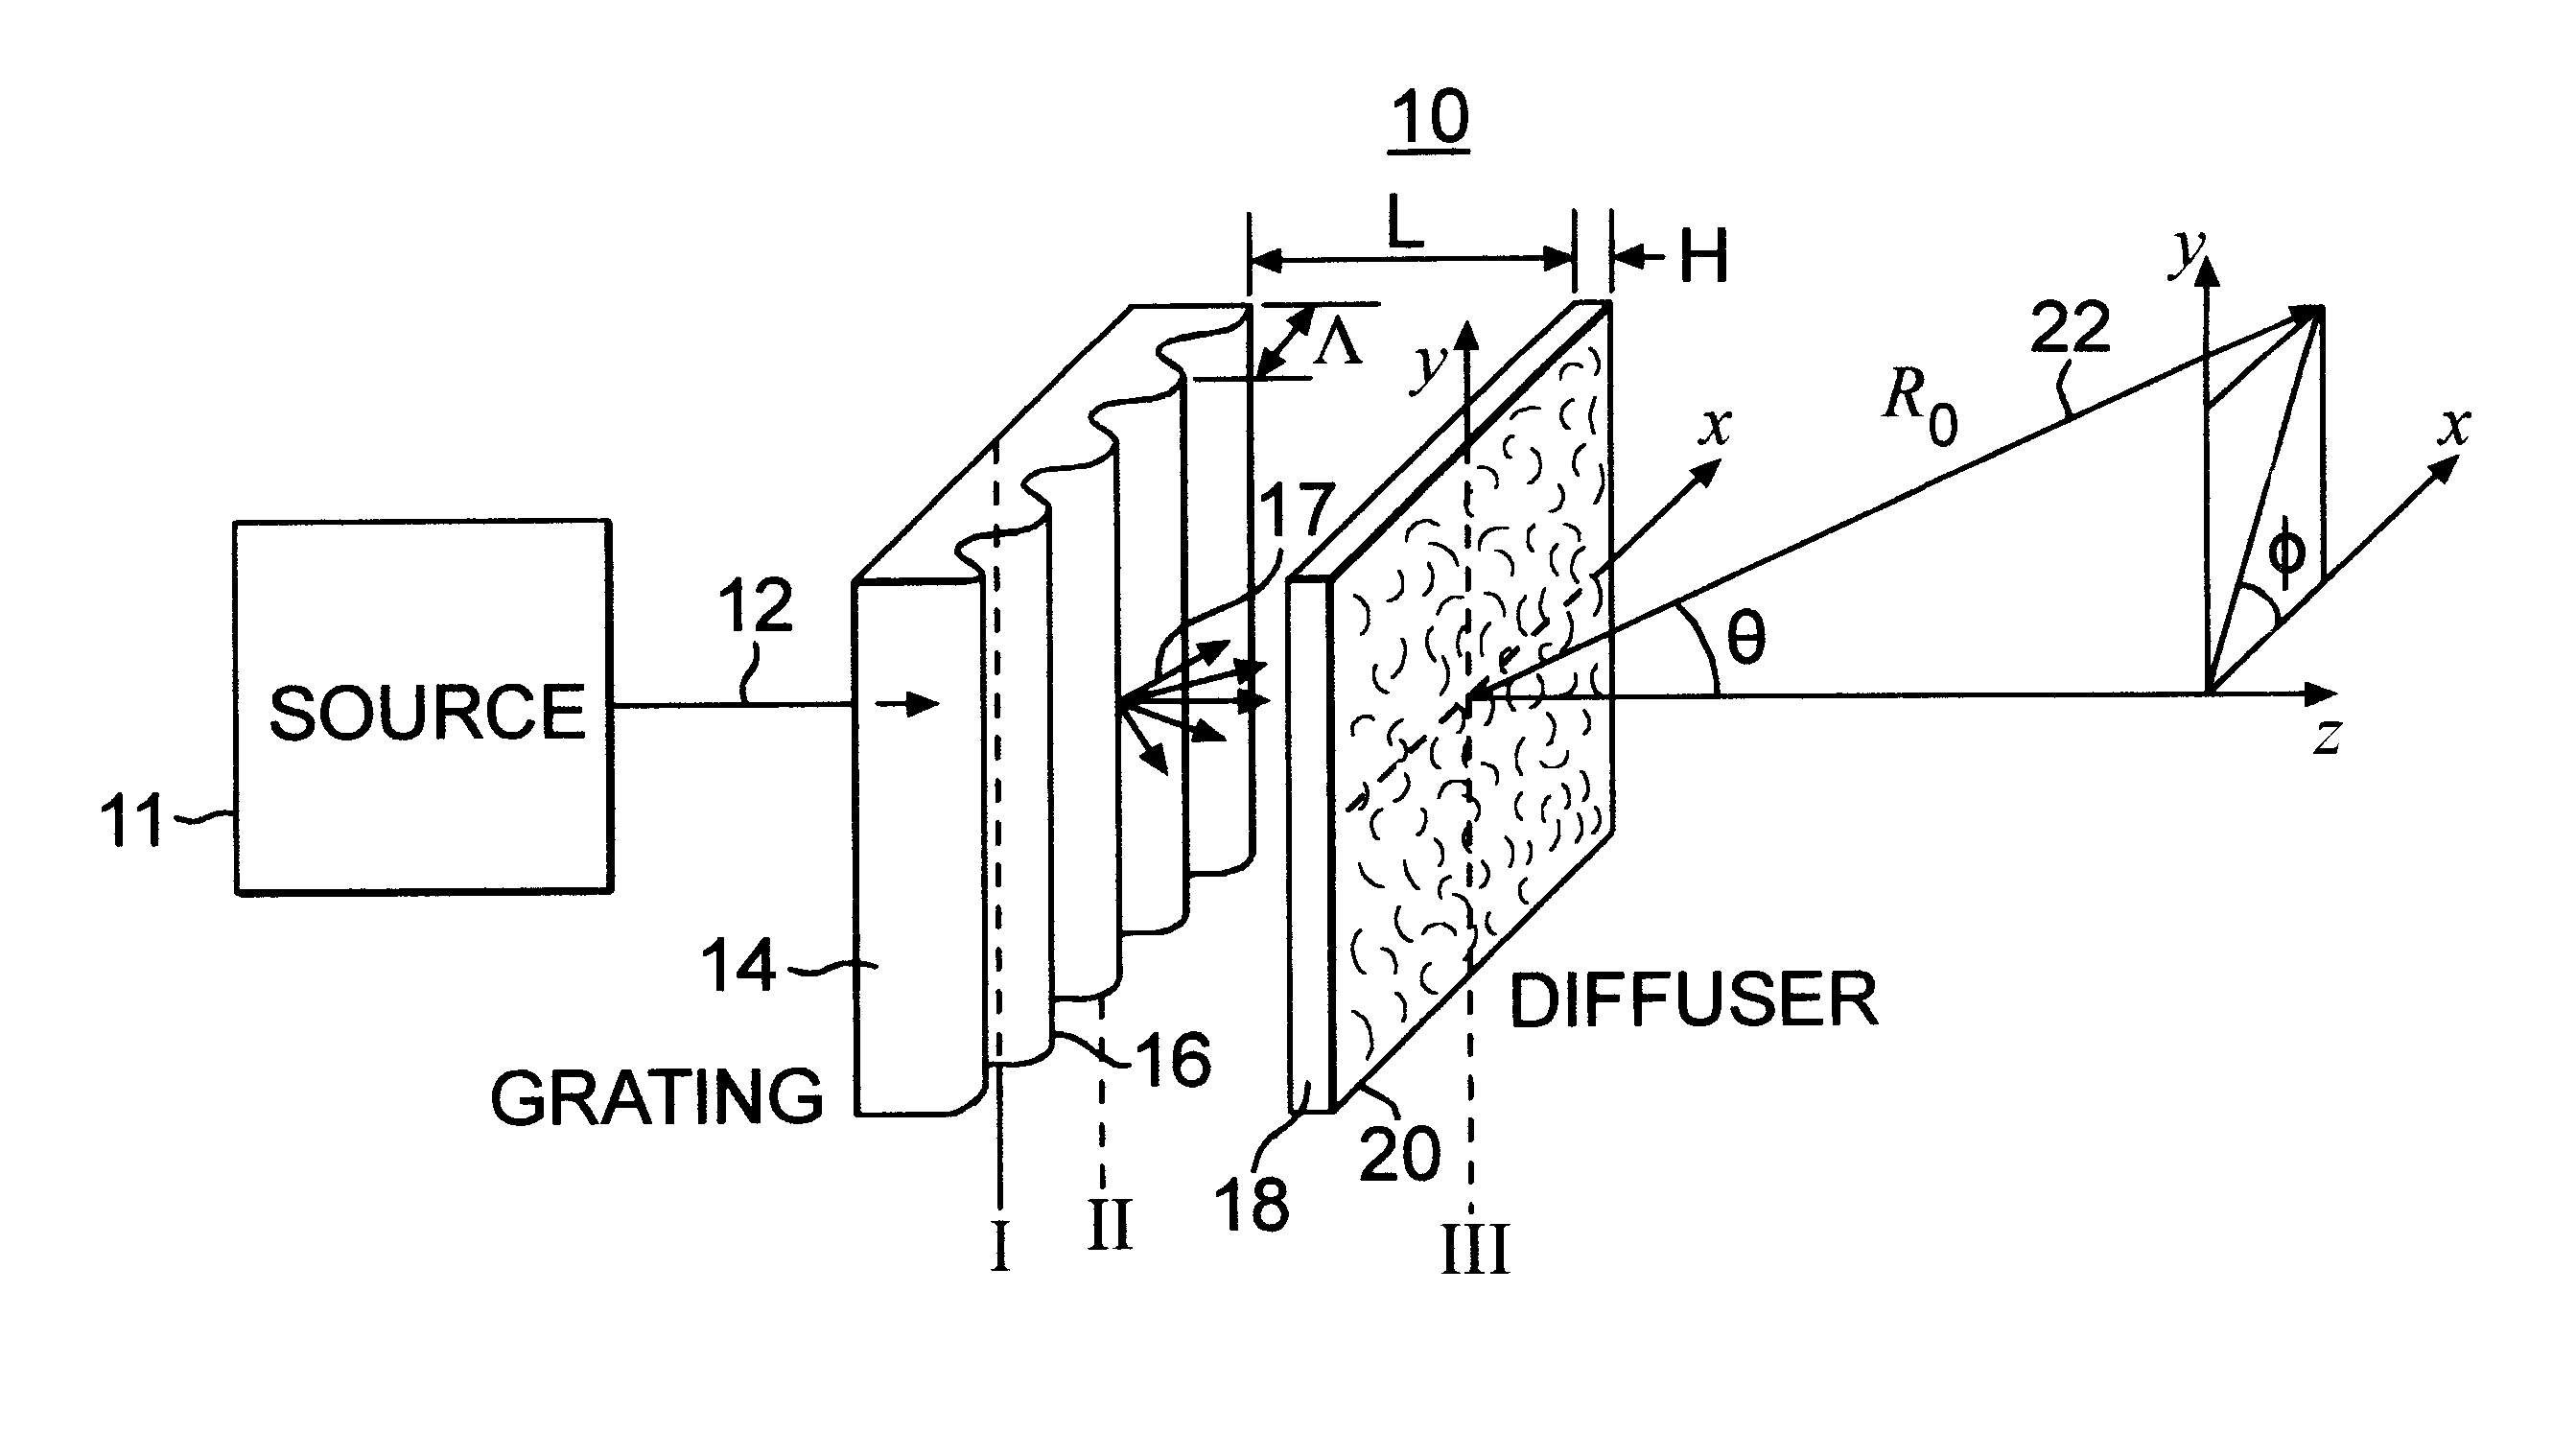 Optical system for diffusing light